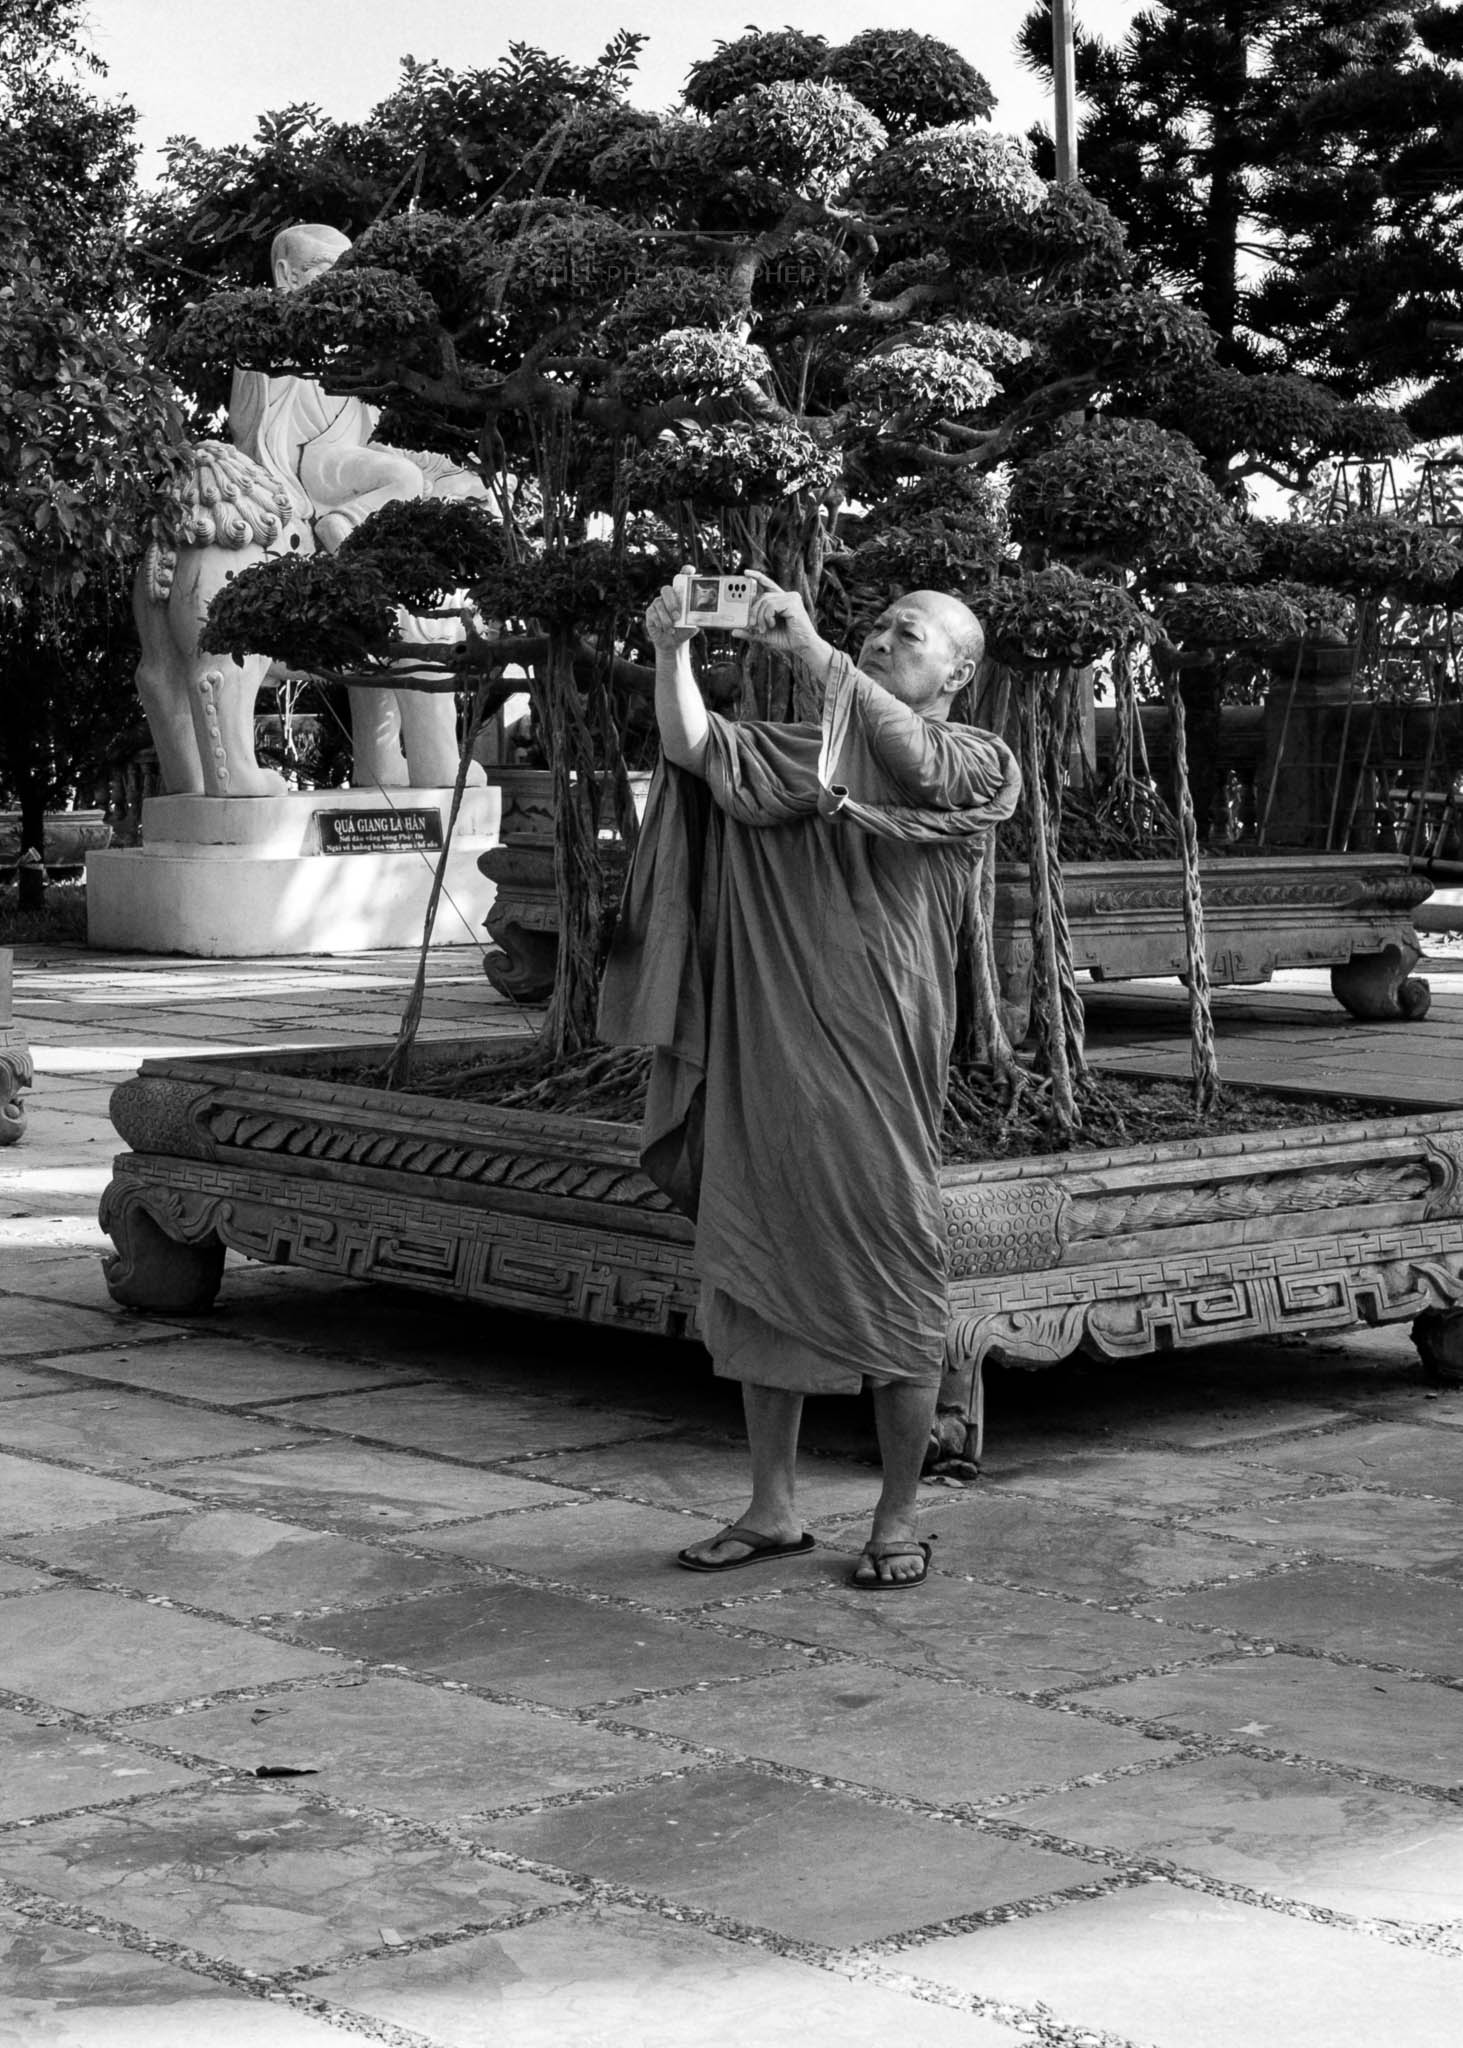 Monk Taking Photographs in serene temple garden in black and white.